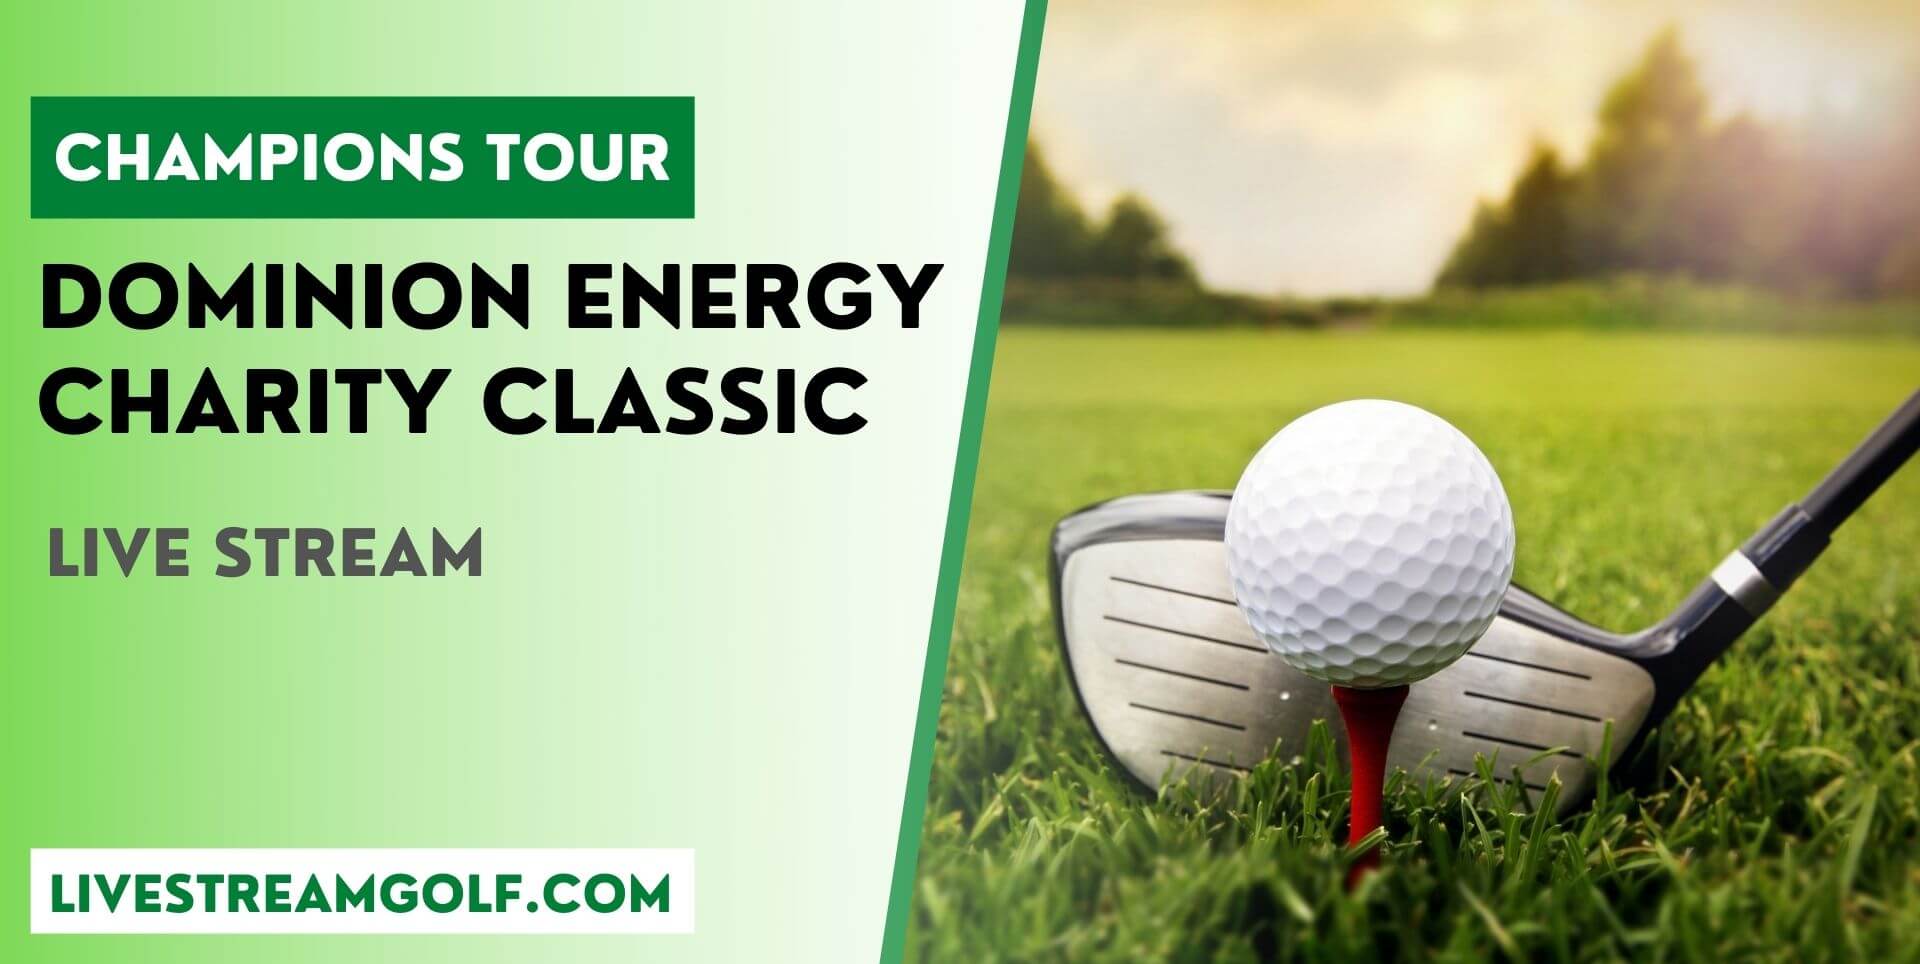 Dominion Energy Charity Classic Day 3 Live Stream: Champions 2022